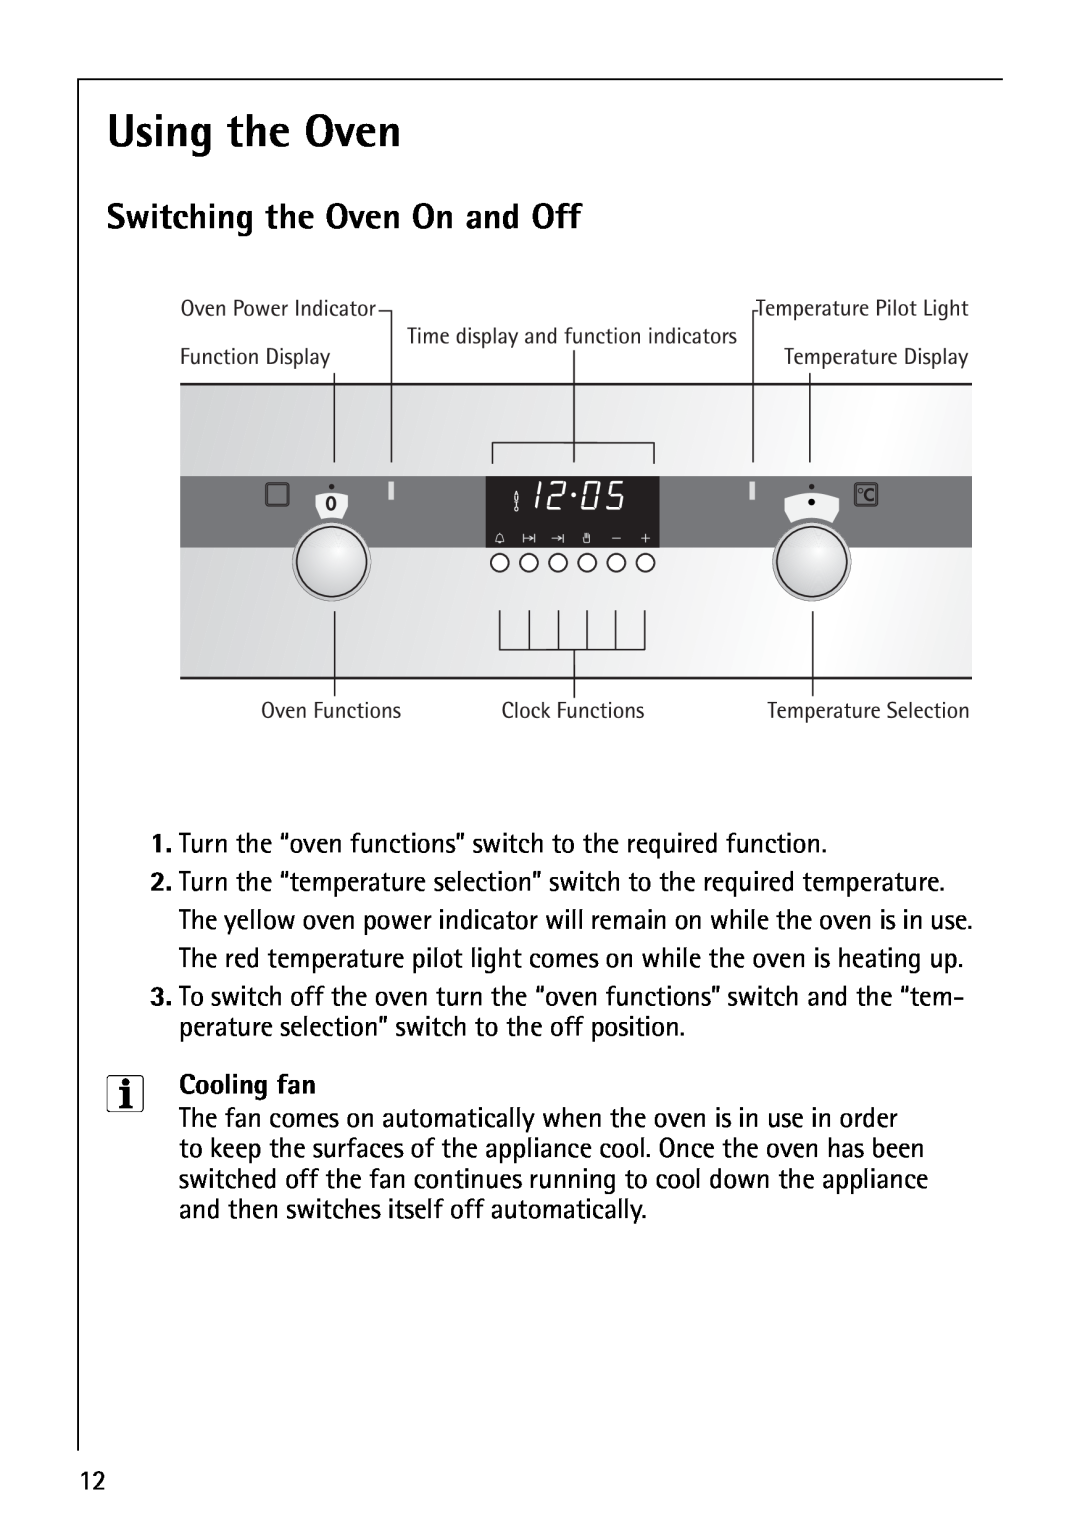 AEG B4130-1 operating instructions Using the Oven, Switching the Oven On and Off, Cooling fan 